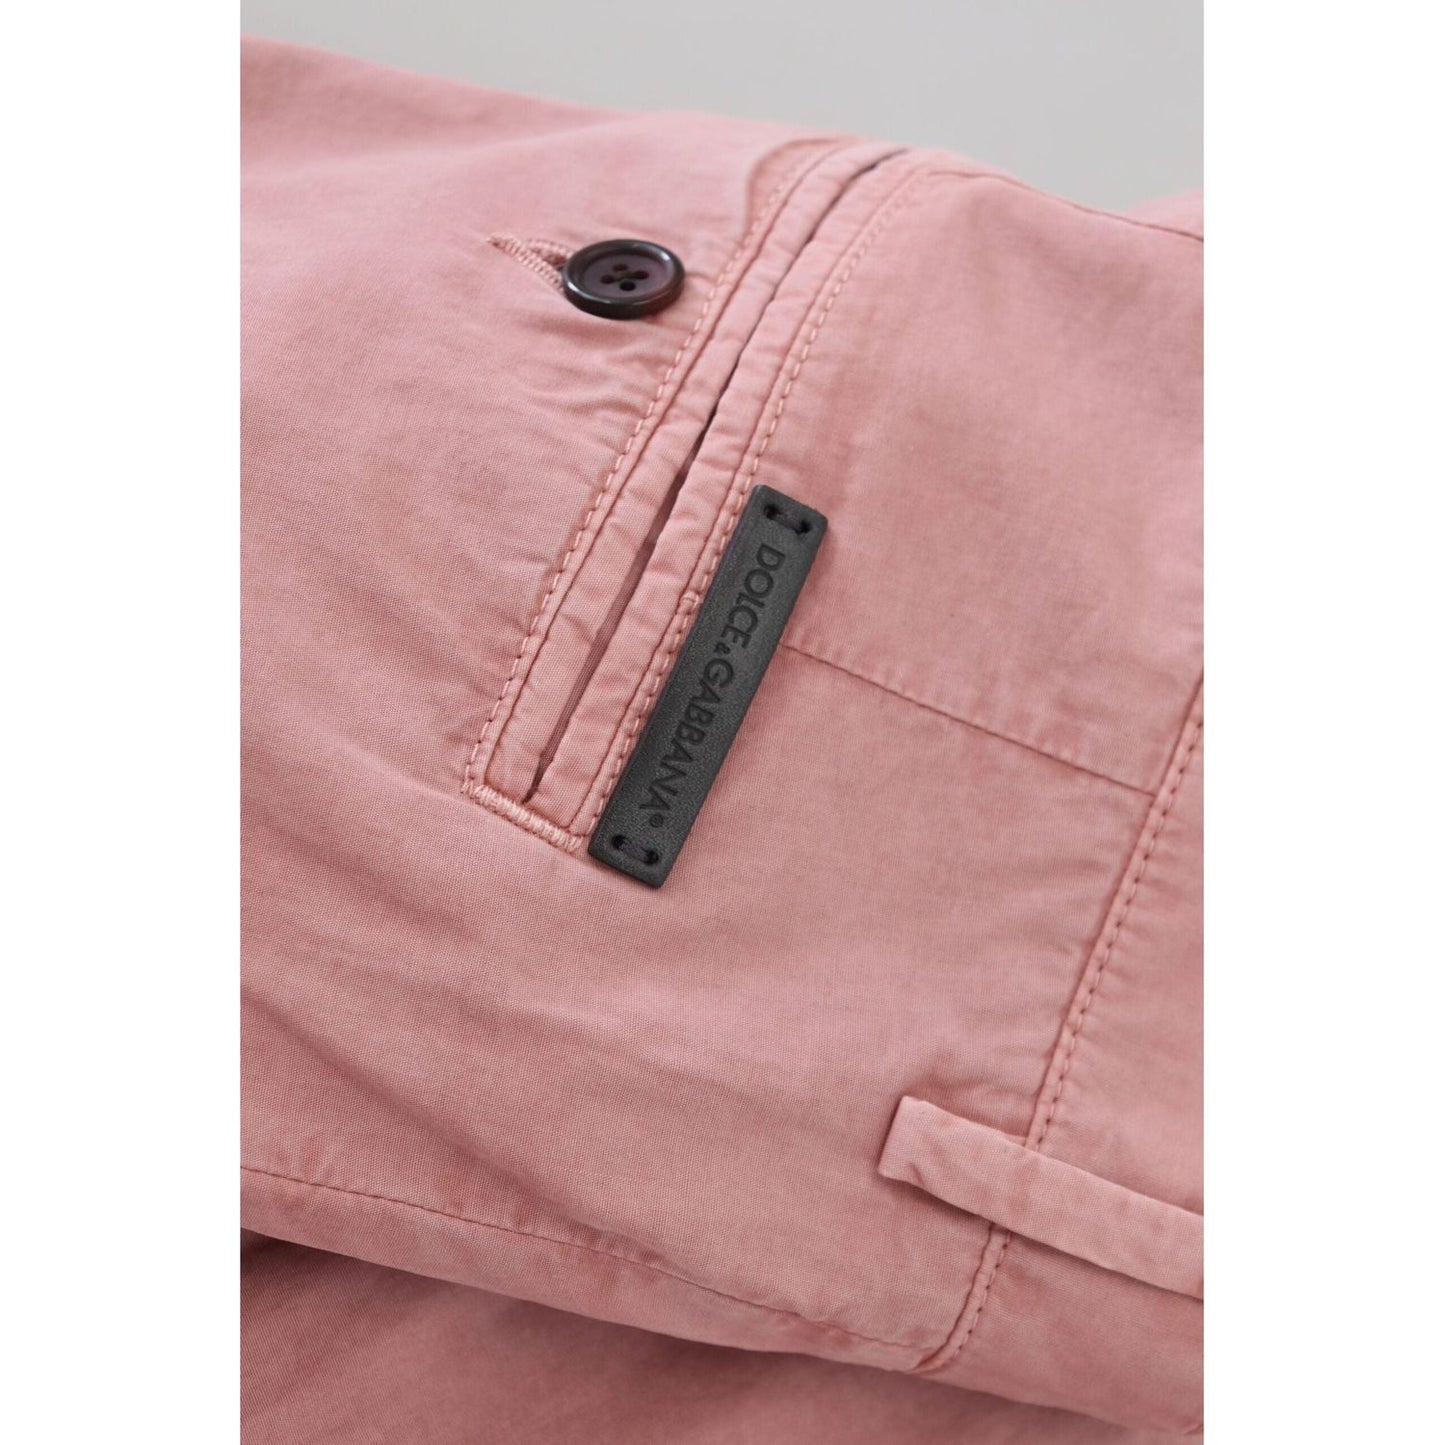 Dolce & Gabbana Exquisite Pink Chino Shorts for Men pink-chinos-cotton-casual-mens-shorts